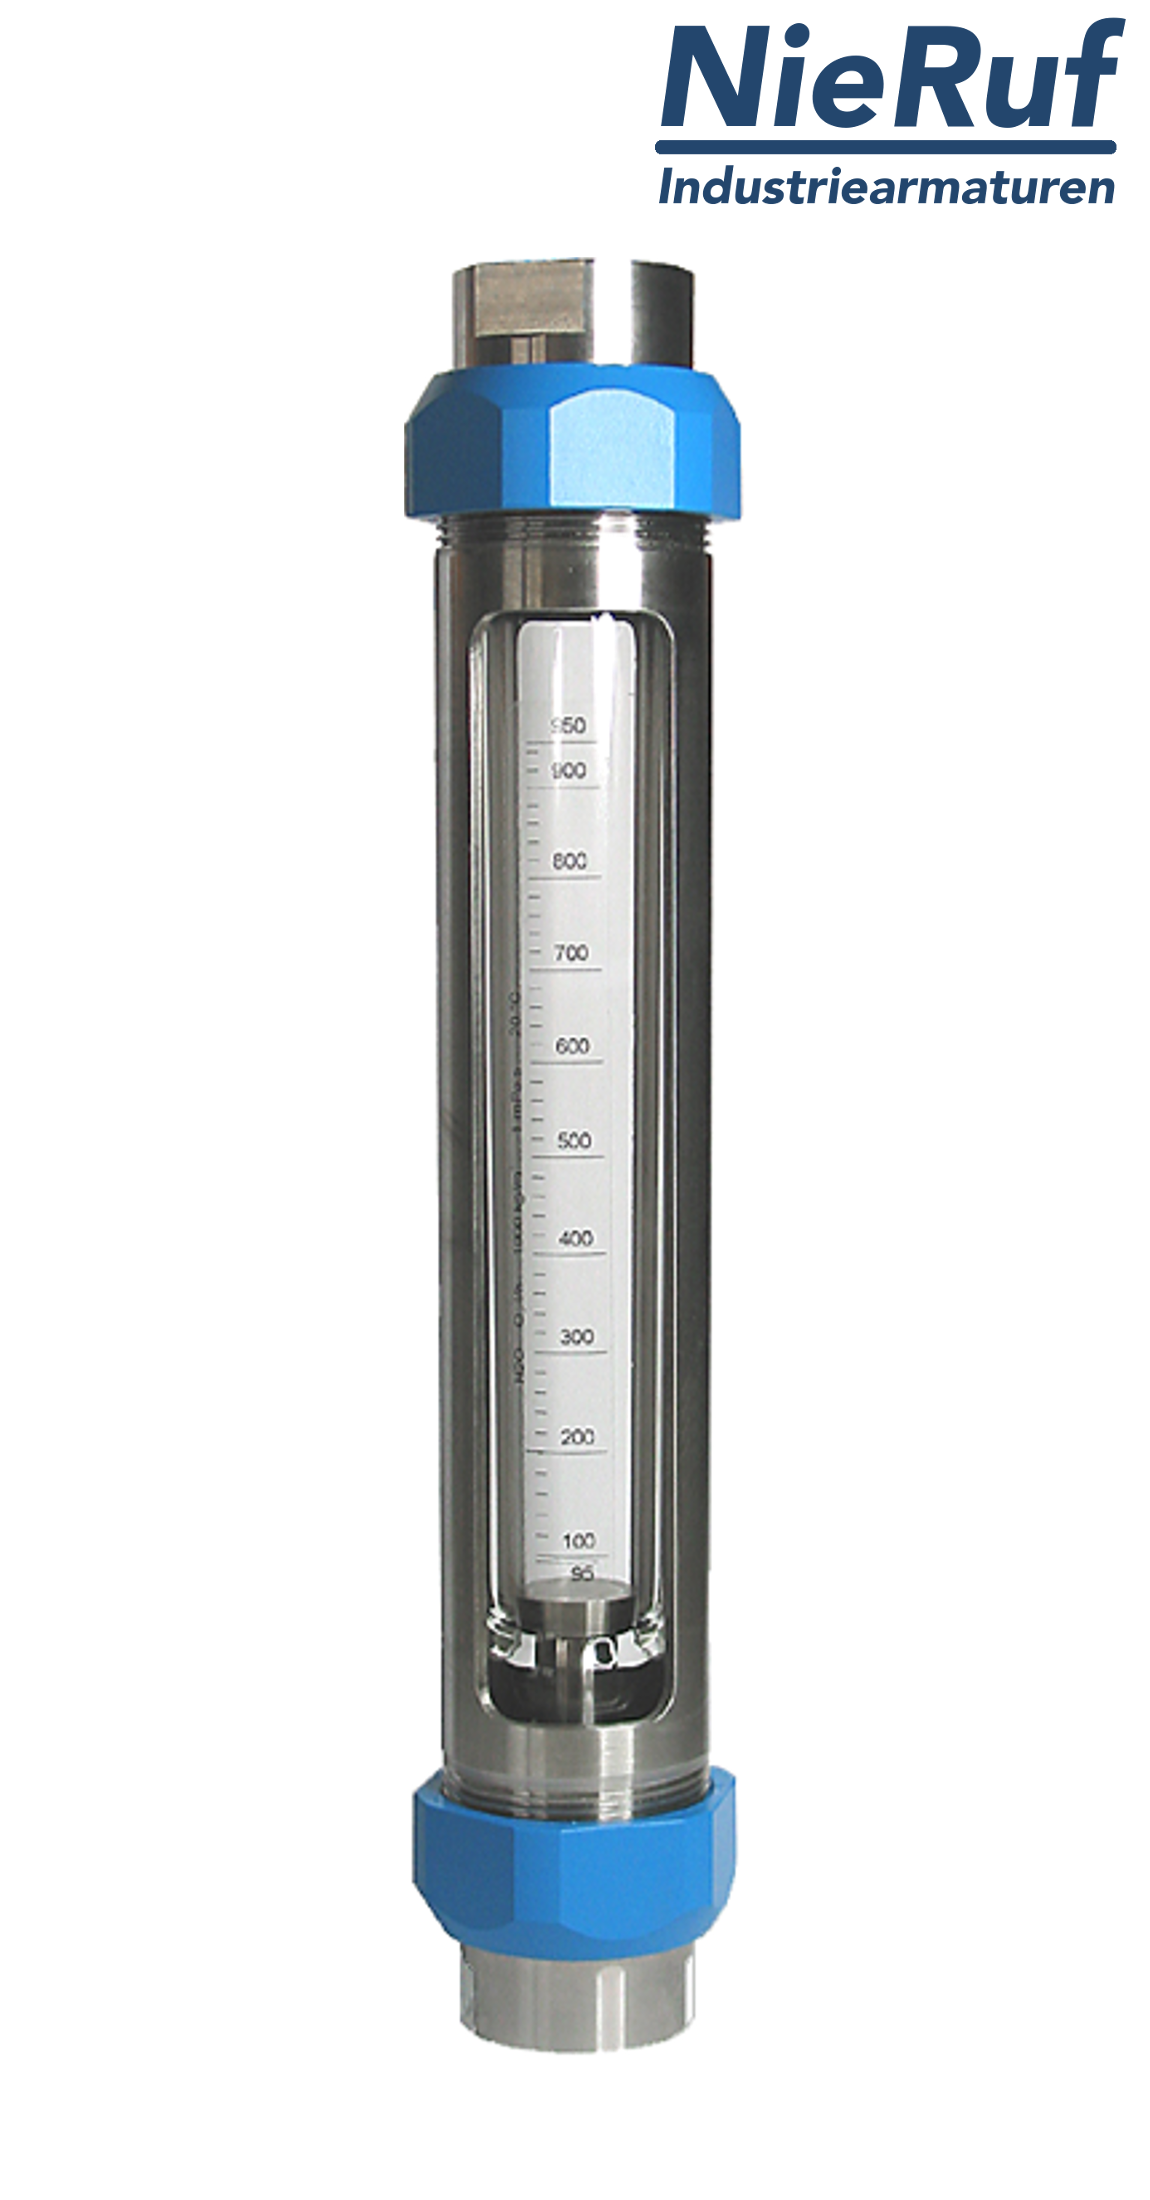 Variable area flowmeter stainless steel + borosilicate 1 1/4" inch 650.0 - 6500 l/h water FKM